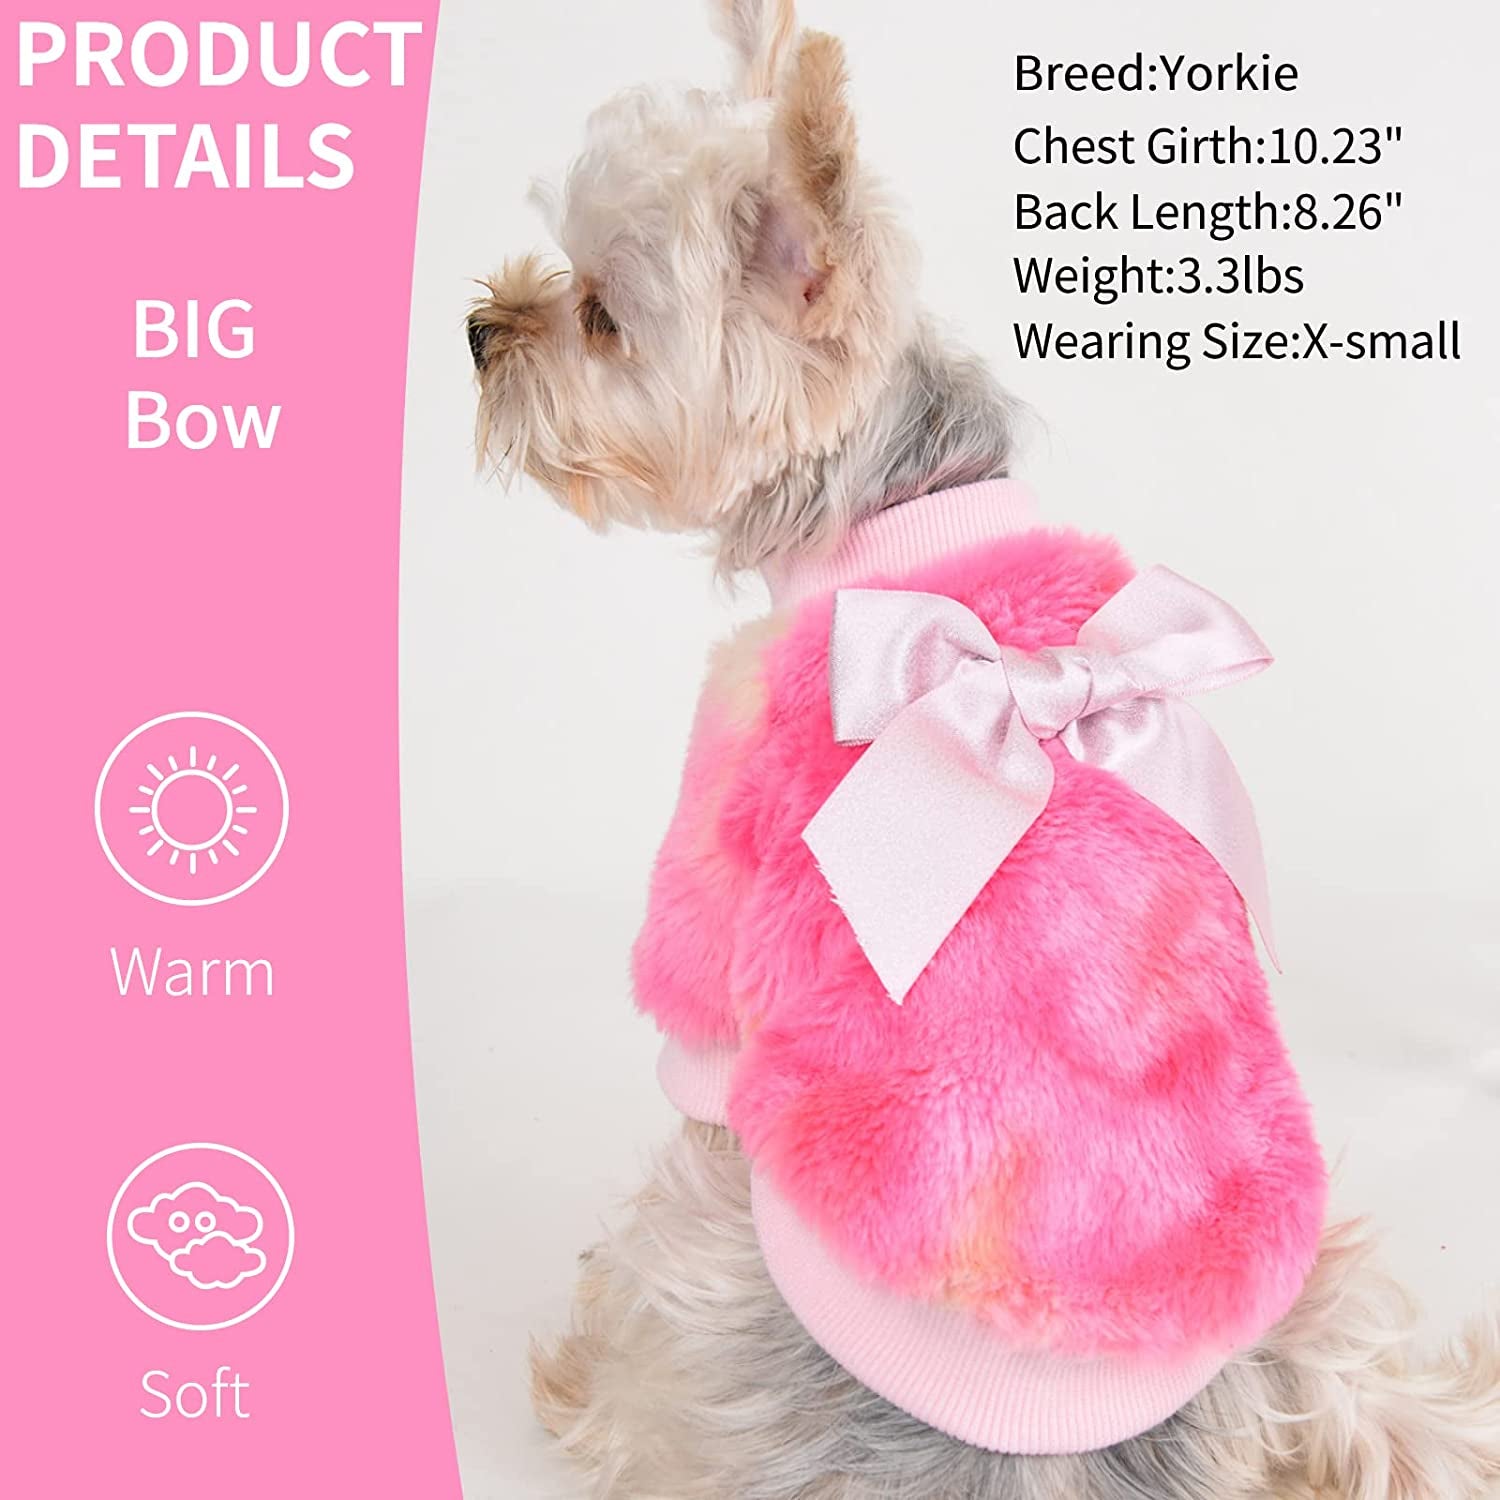 Yikeyo XXS Dog Sweaters for Small Dogs Male Winter Warm Fleece Dog Clothes  Chihuahua Yorkie Teacup Puppy Sweater Pet Coat Jacket Cat Outfit for Puppy